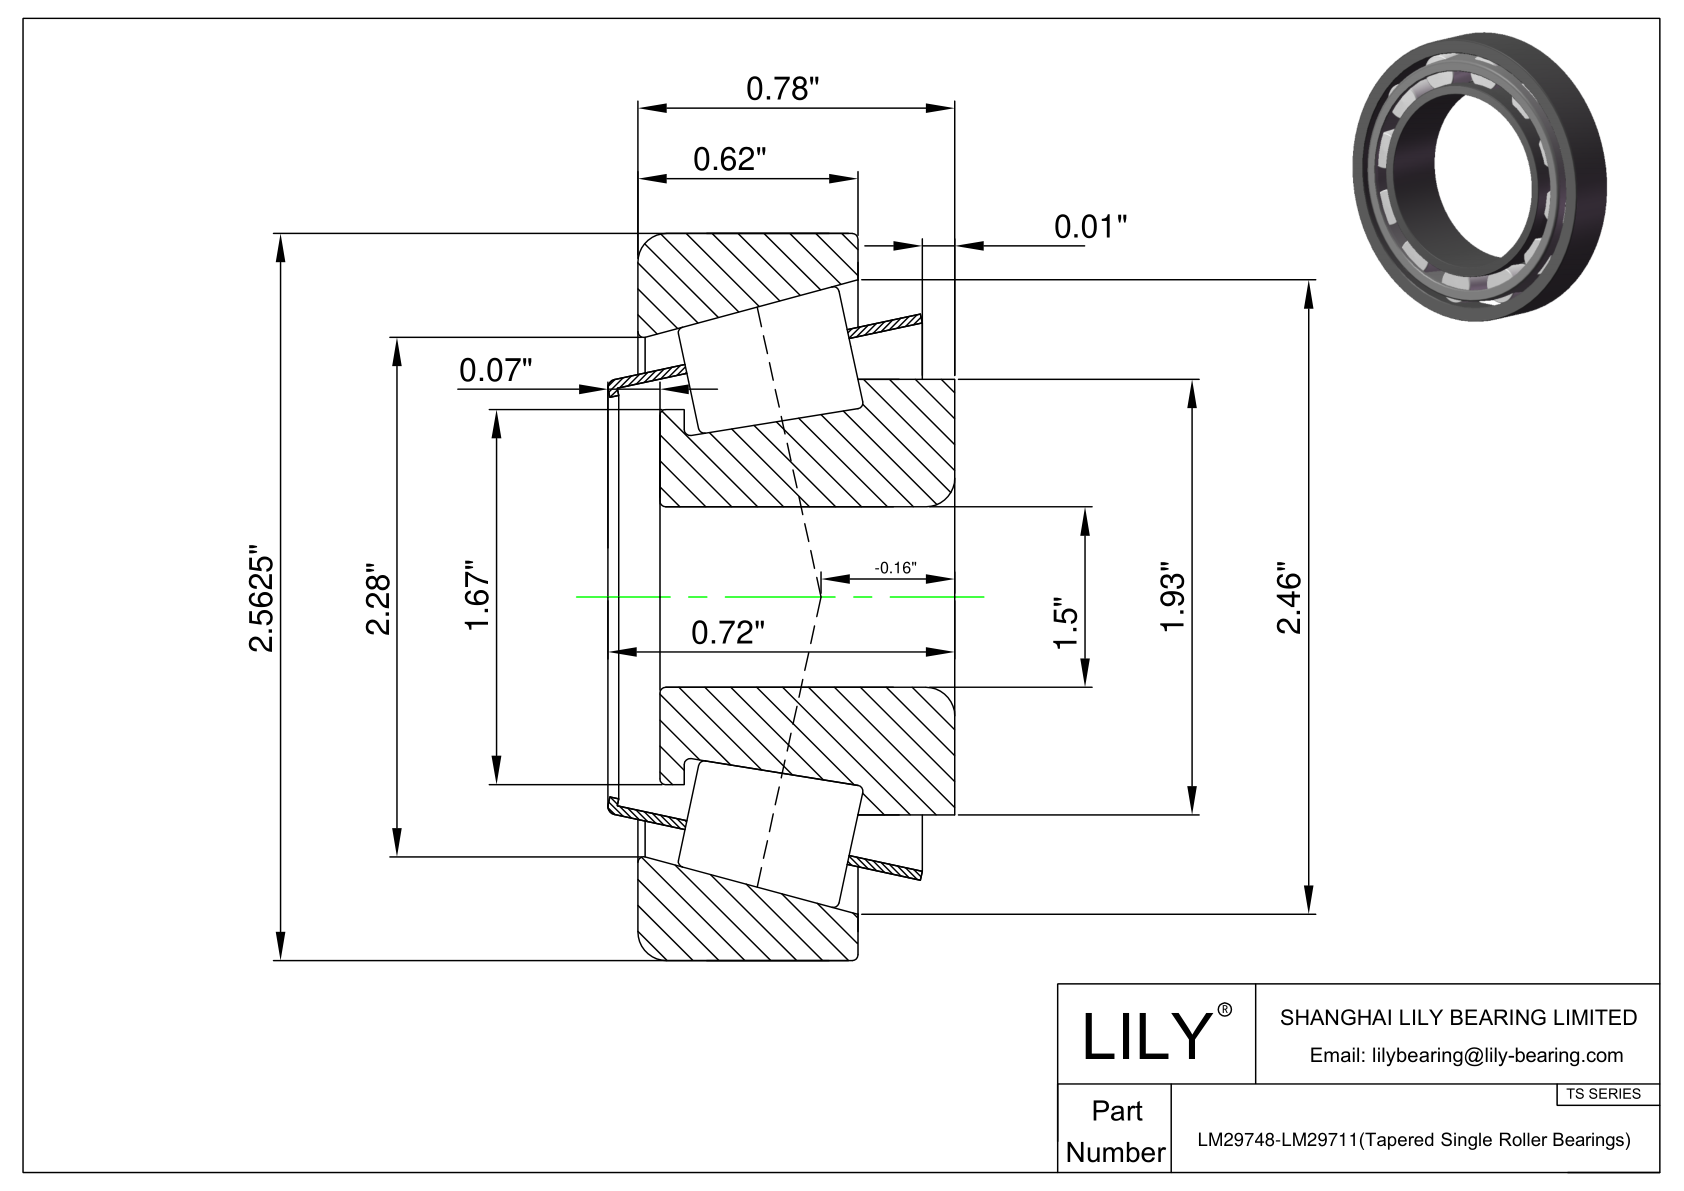 LM29748-LM29711 TS (Tapered Single Roller Bearings) (Imperial) cad drawing